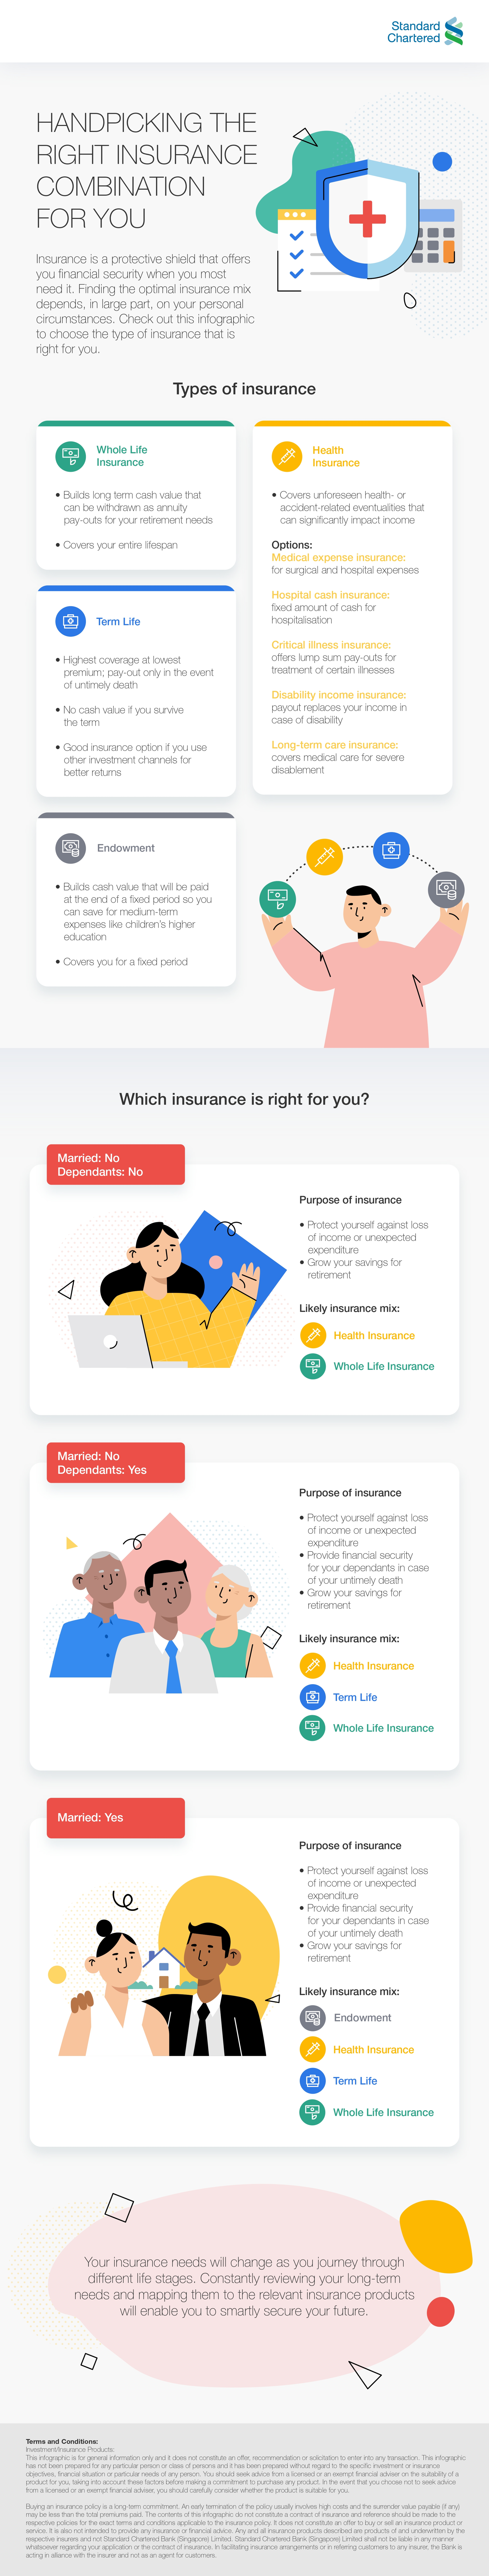 types-of-insurance-infographic